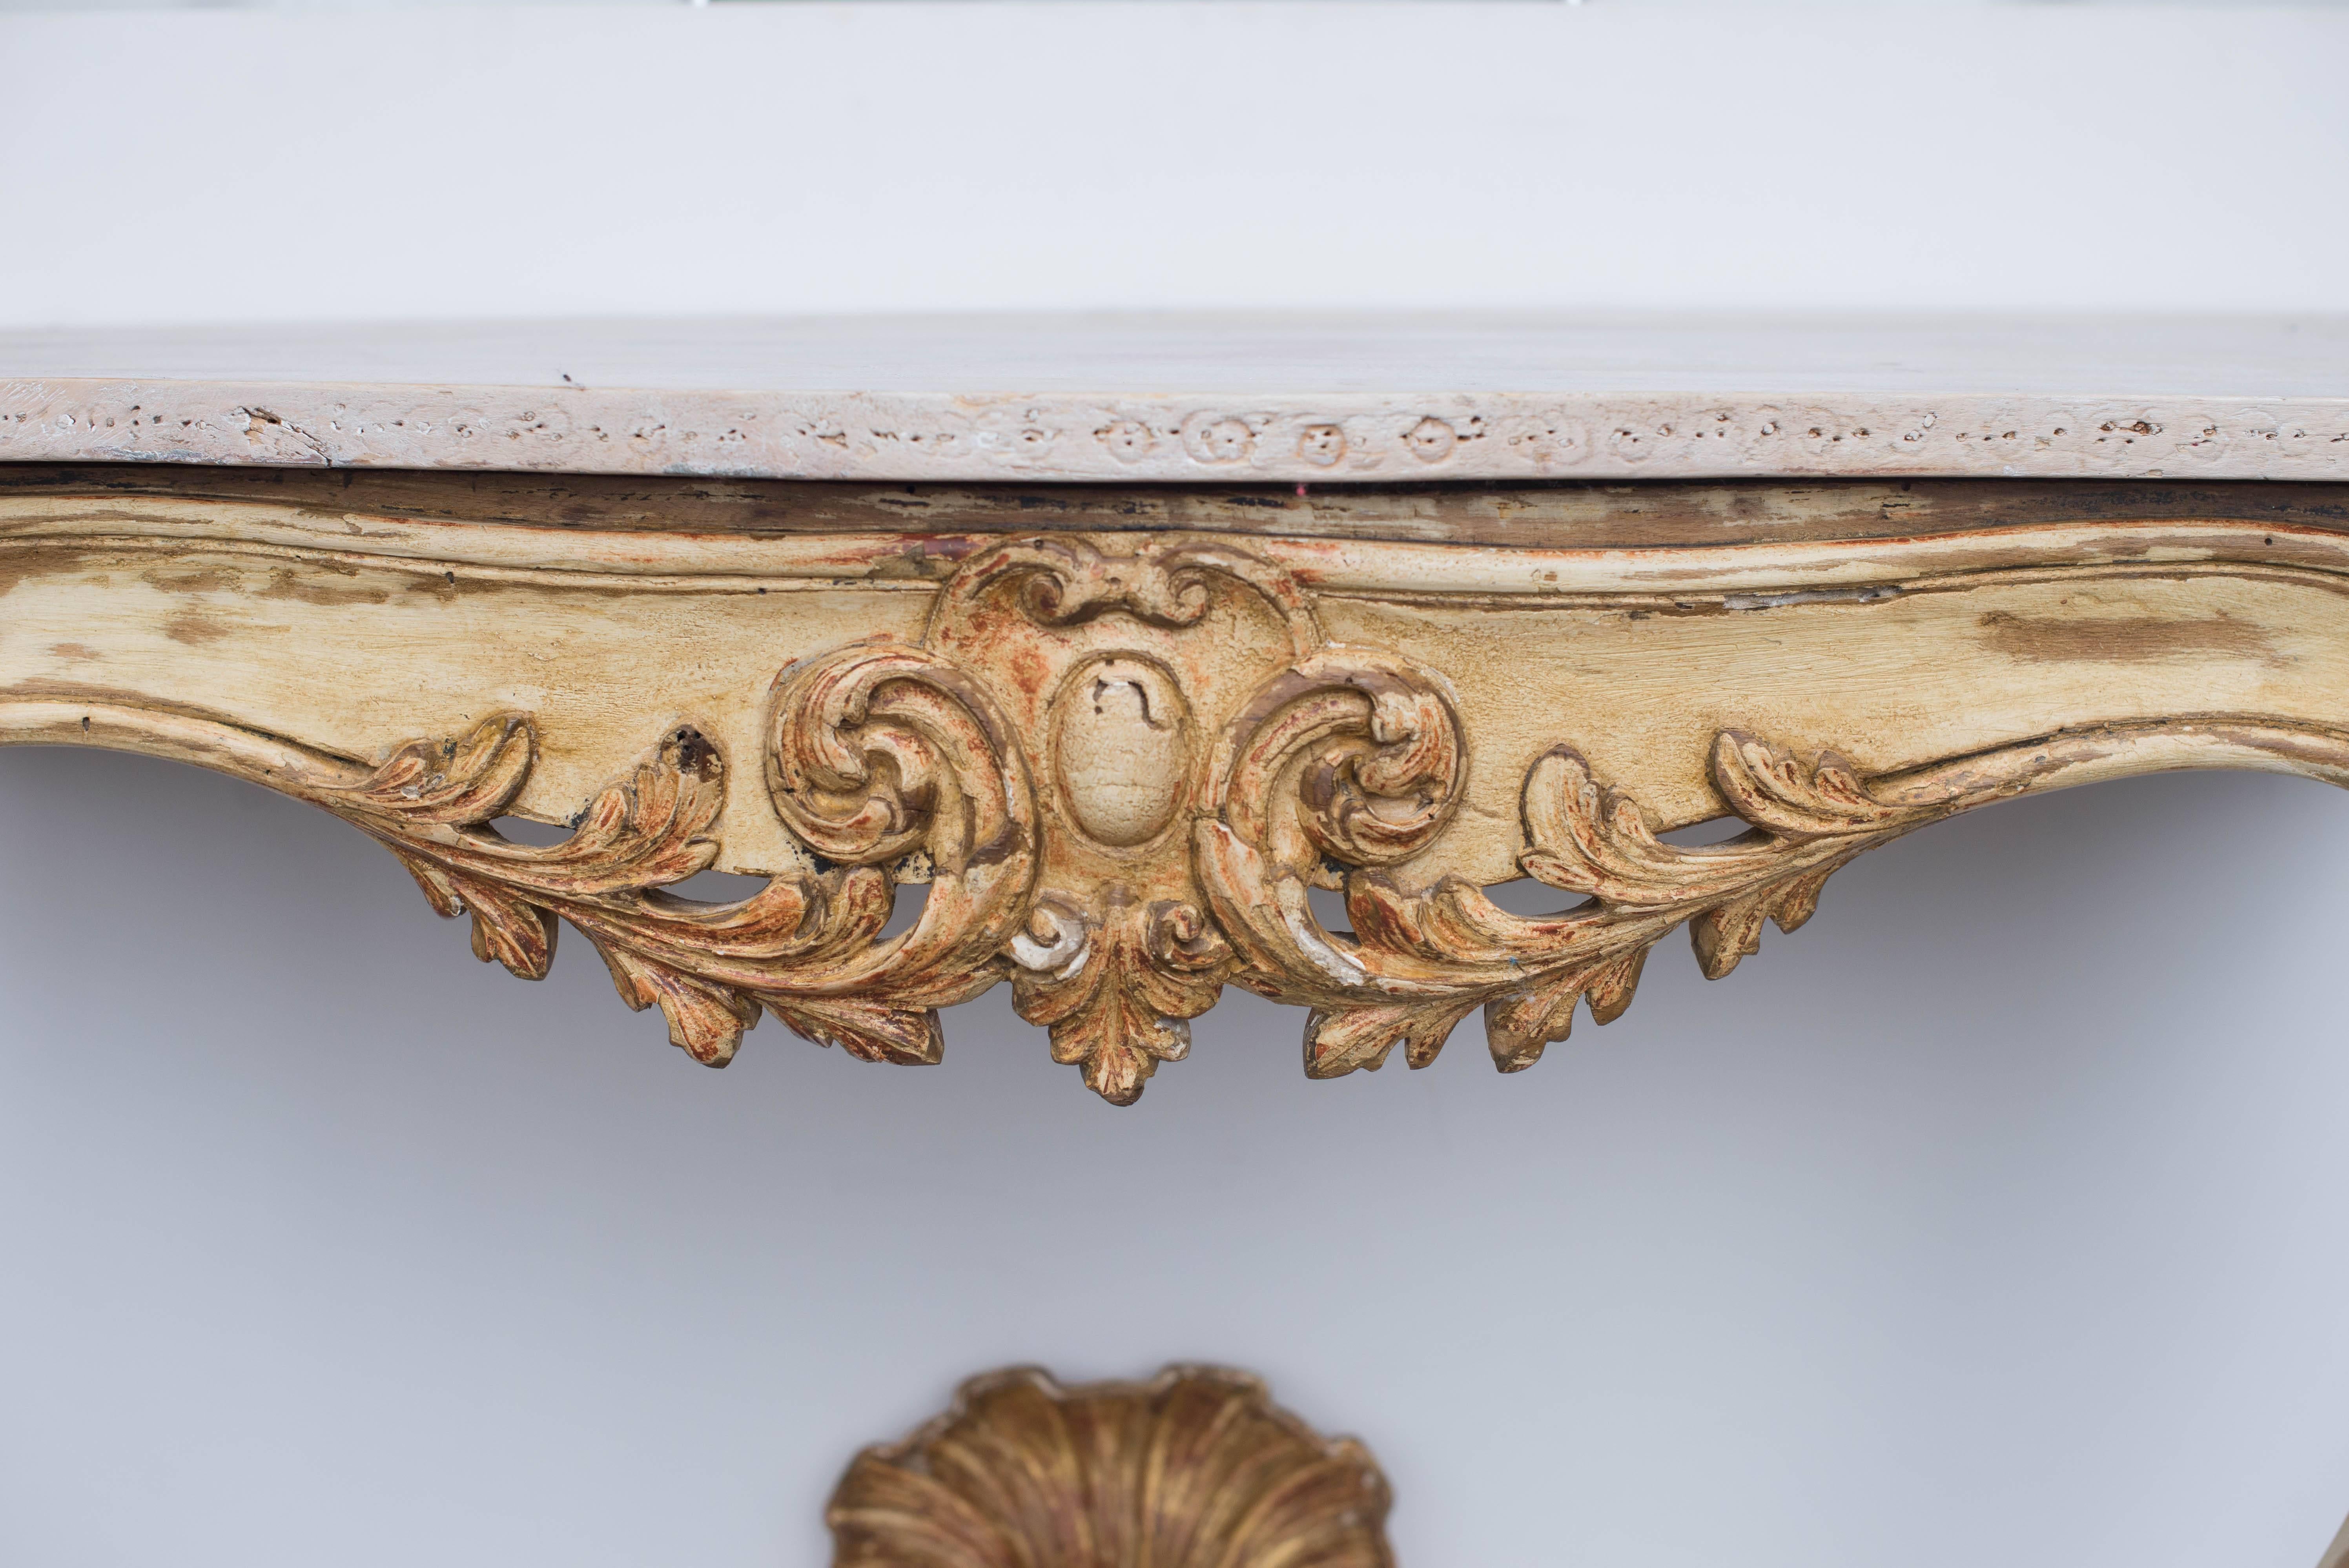 This 19th century French wall console has a giltwood and rich creamy painted finish. It features lovely wood carvings and cabriole legs. The top has a cream colored painted finish but could be painted any color. This item was purchased in Aix en